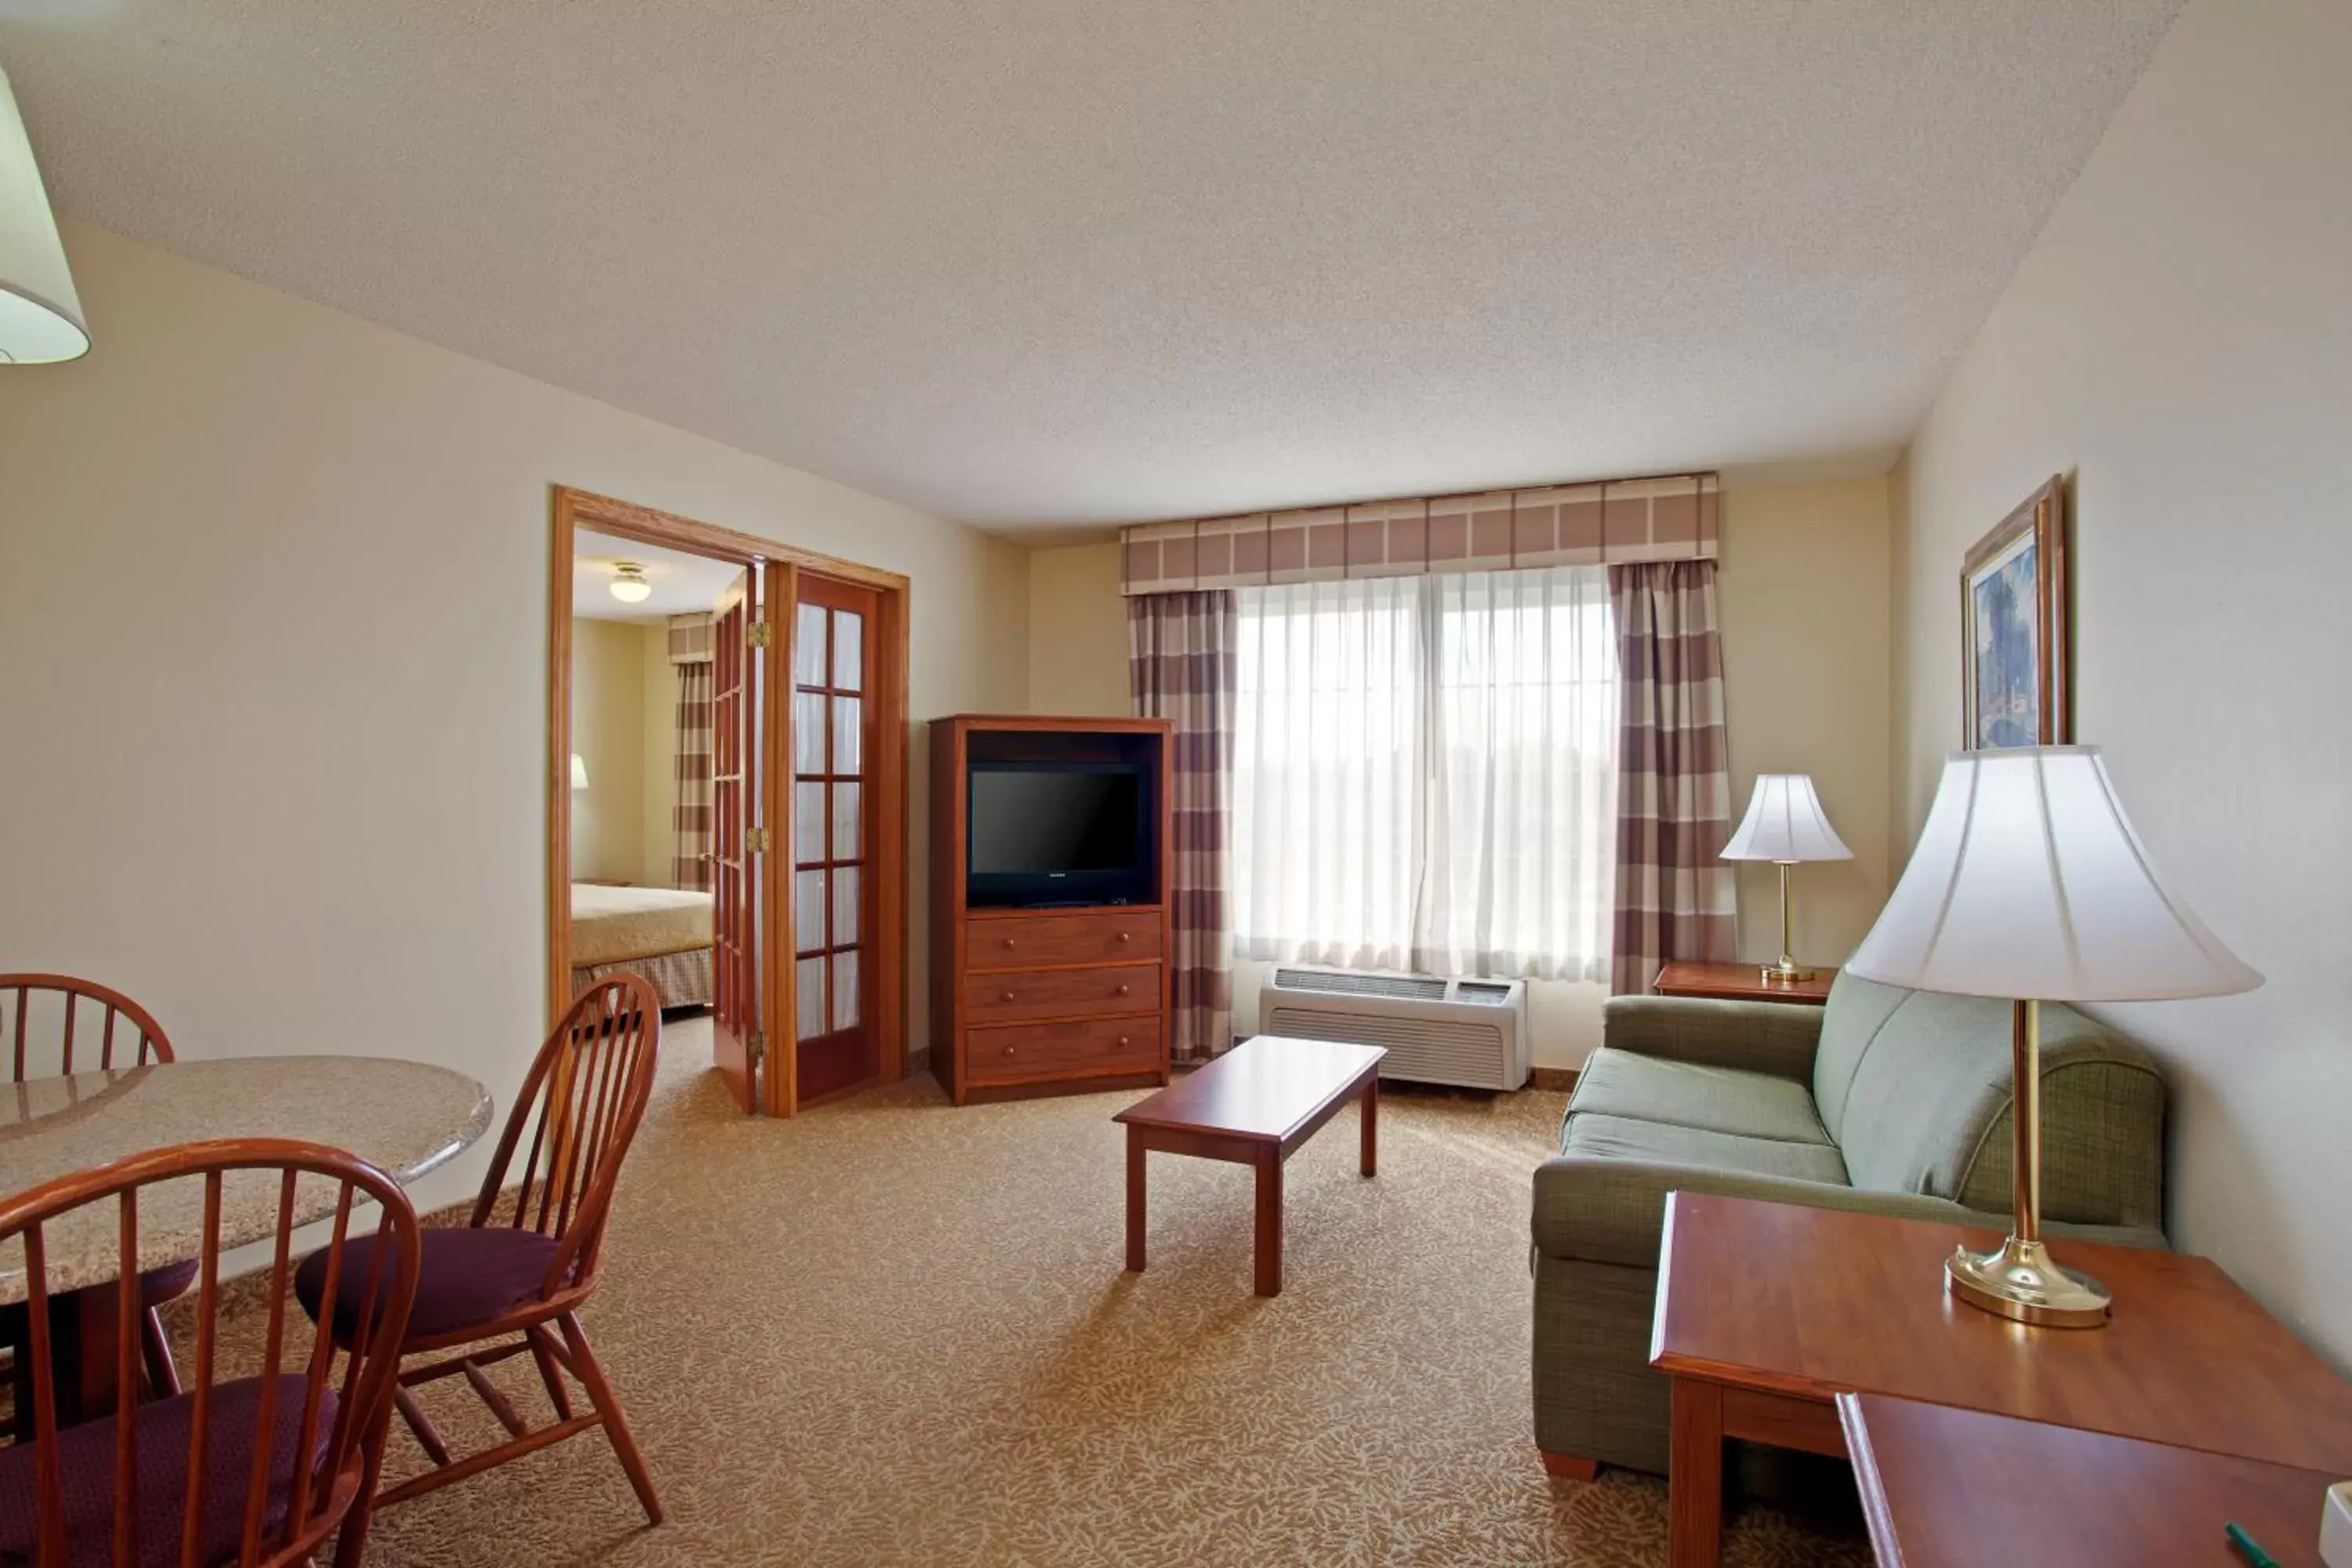 One-Bedroom King Suite with Sofa Bed in Country Inn & Suites by Radisson, Minneapolis/Shakopee, MN